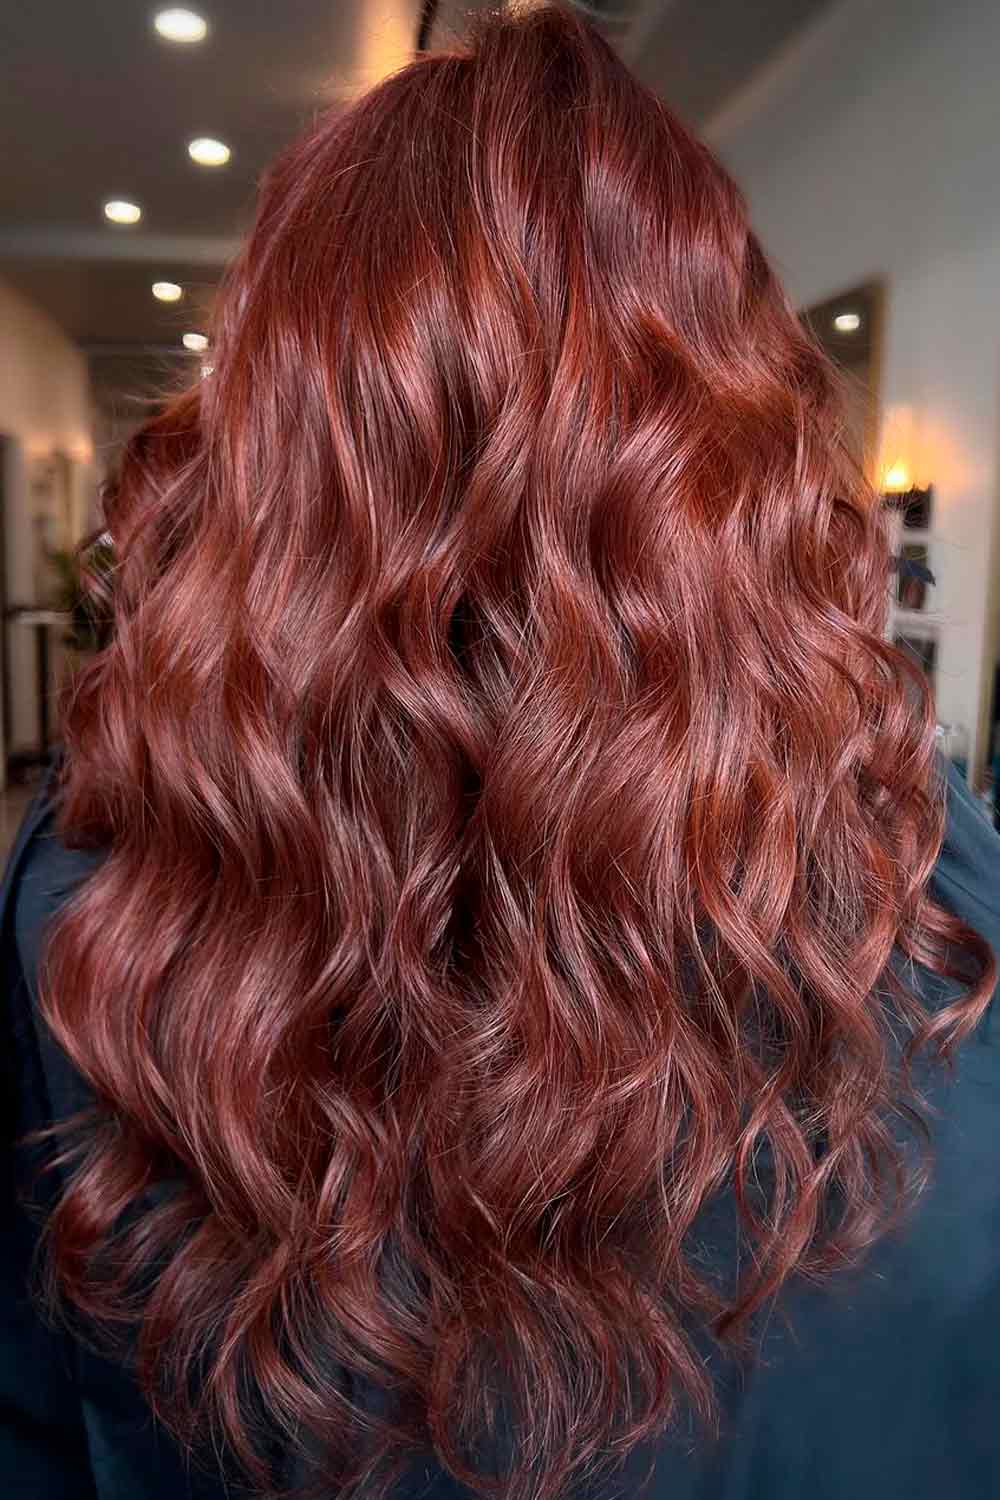 Tips For Caring For Your Auburn Hair